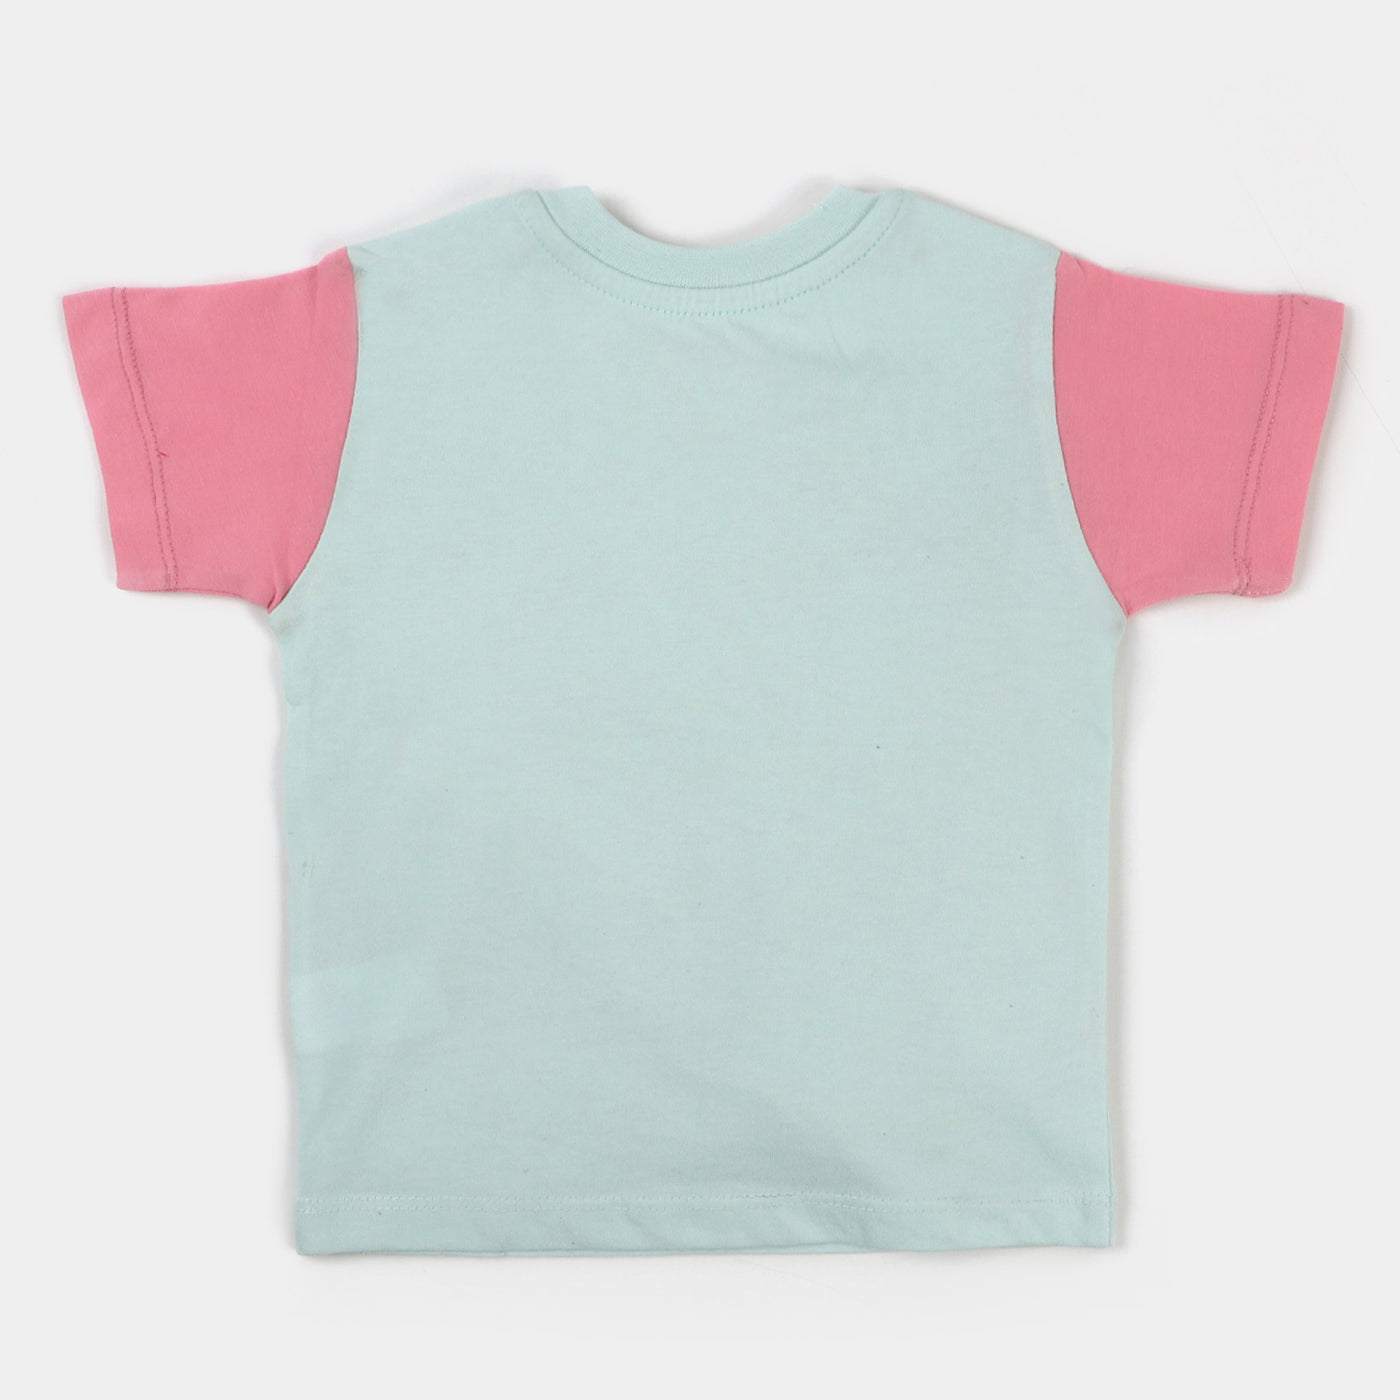 Infant Girls T-Shirt Character - Sky Blue And Pink